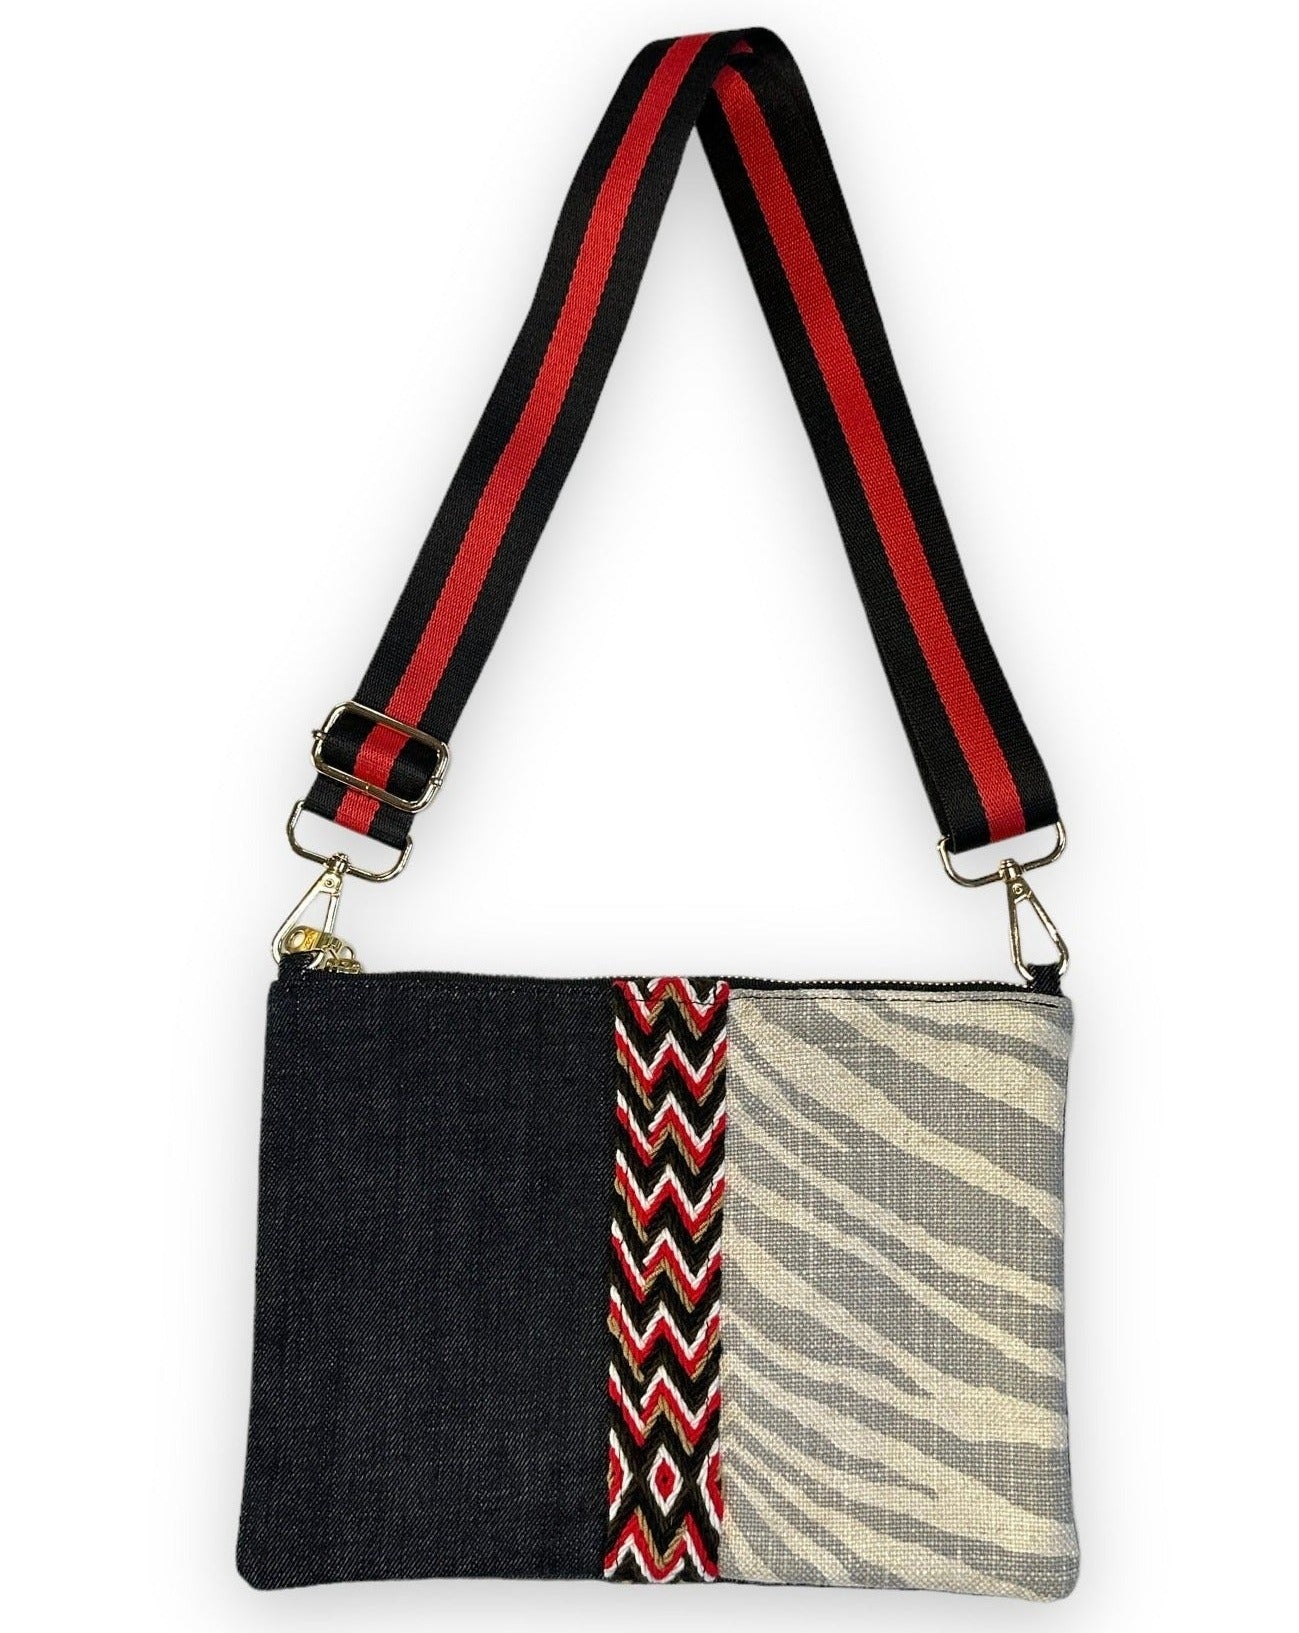 Mina Crossbody bag- the crossbody bag that takes you from work, errands to happy hour